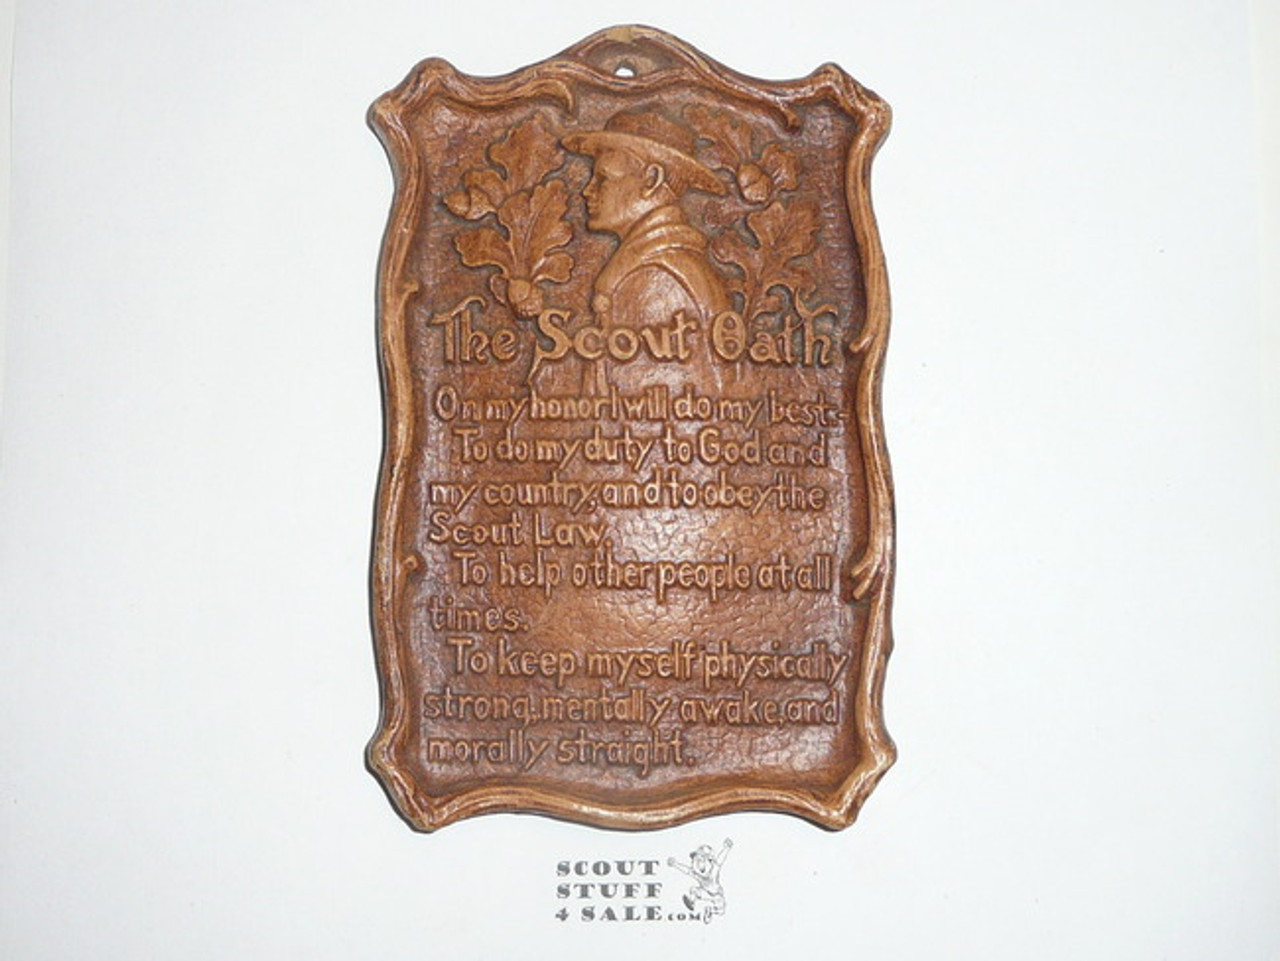 1960's Boy Scout Pressed Wood Syroco "The Scout Oath" Wall Ornament 2nd Type